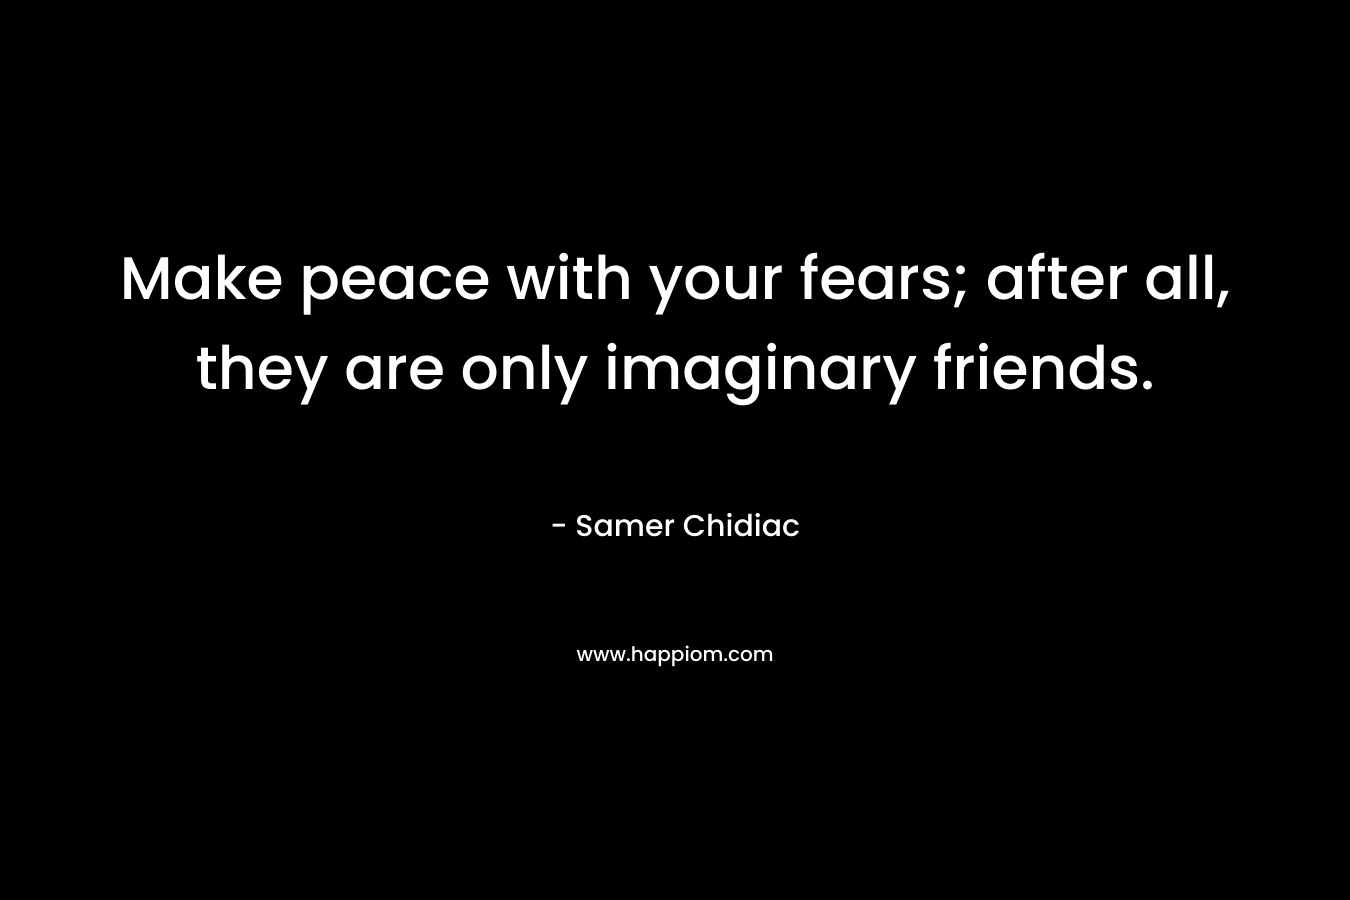 Make peace with your fears; after all, they are only imaginary friends.